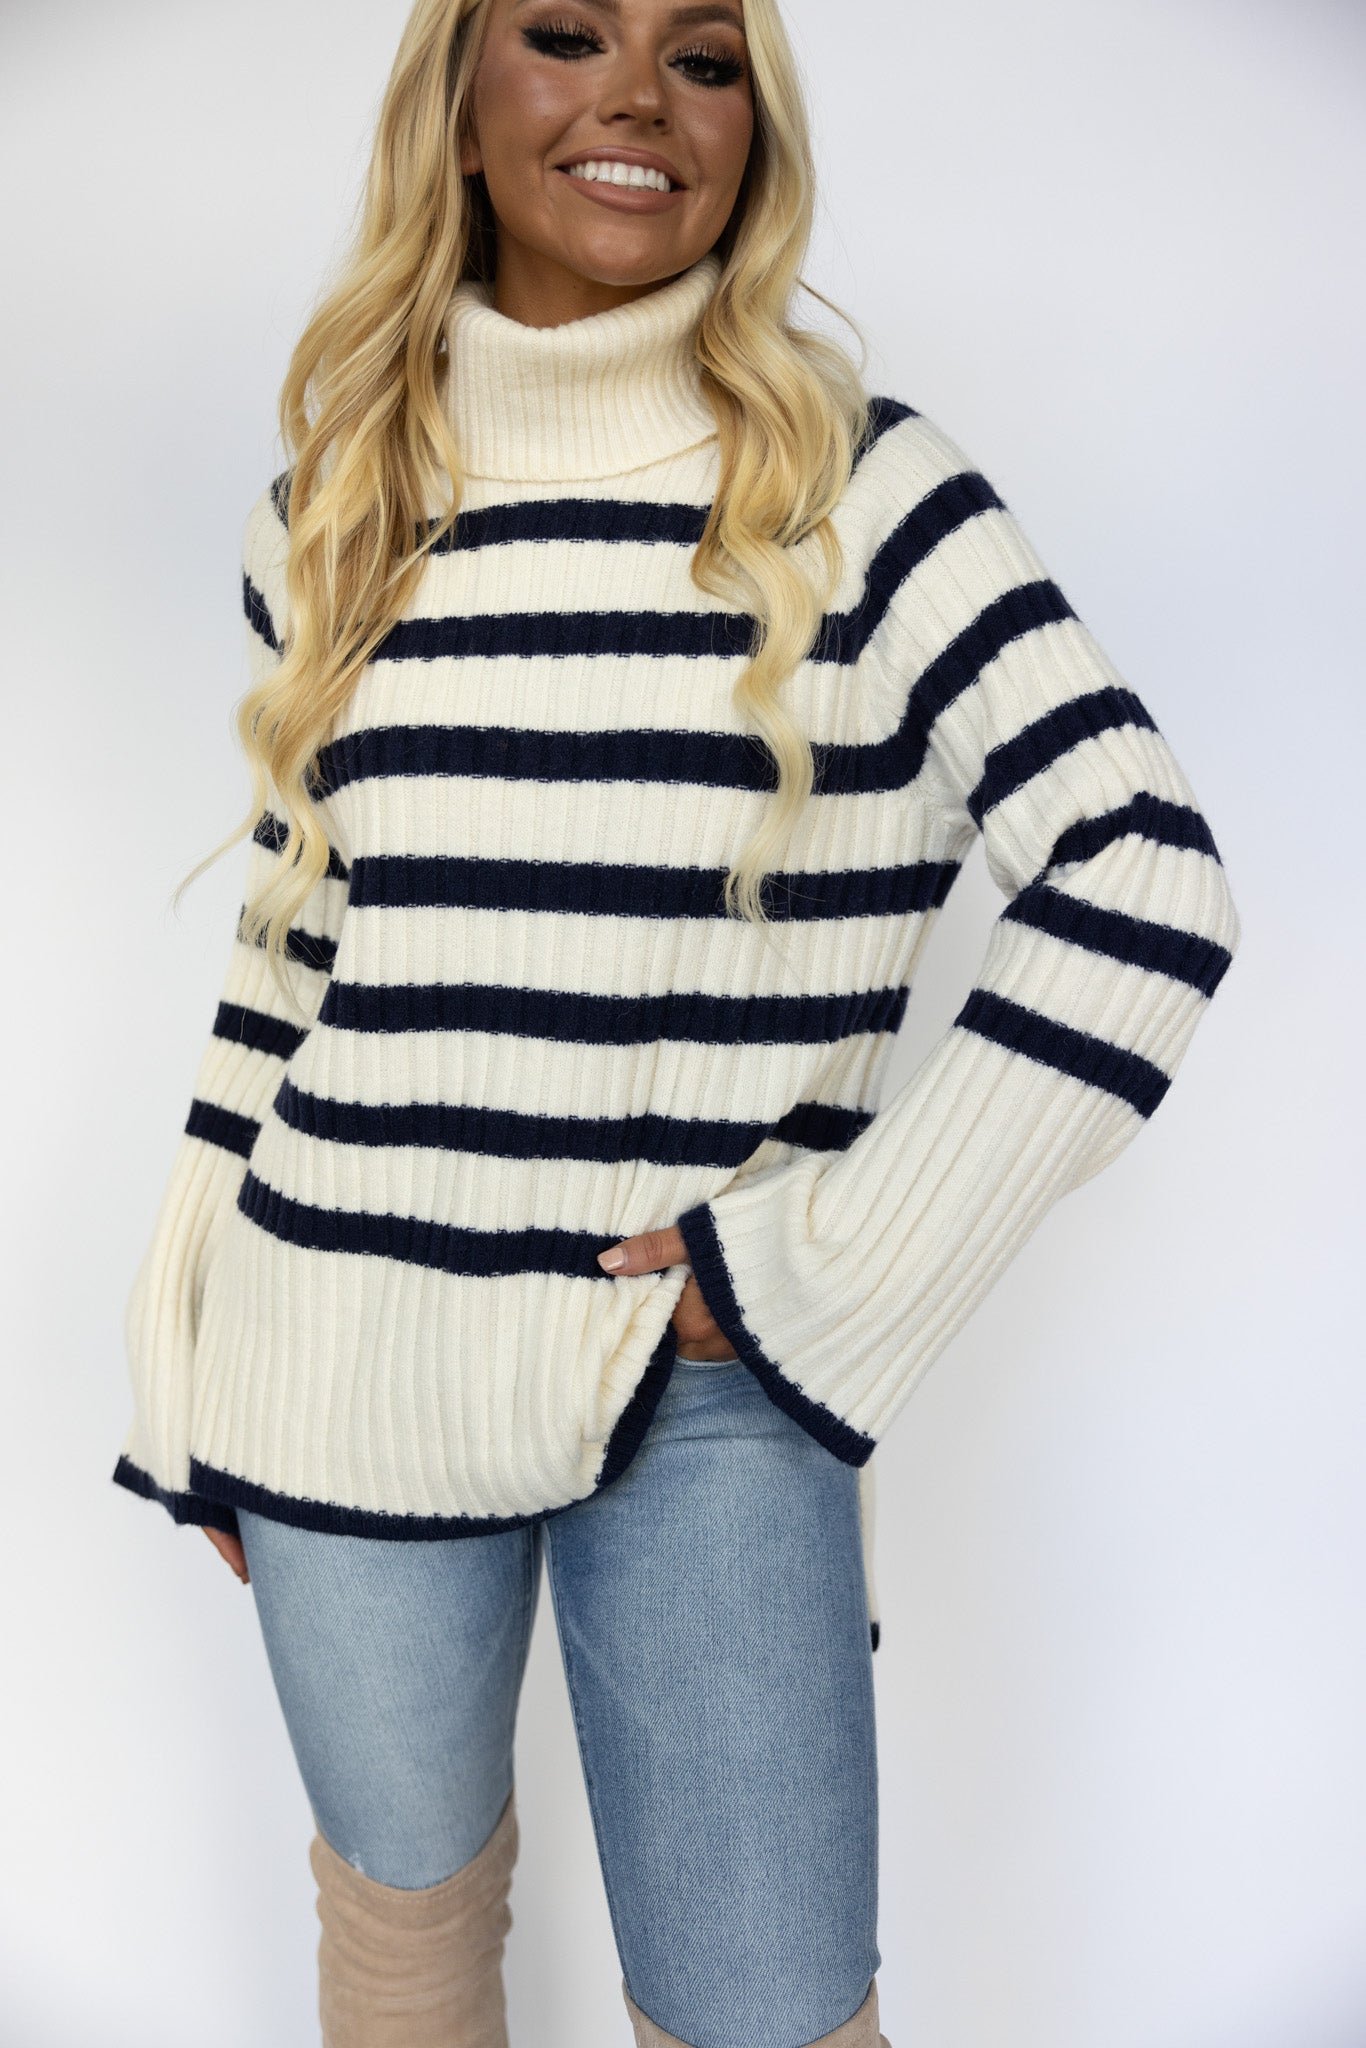 Between The Lines Turtleneck Striped Sweater FINAL SALE